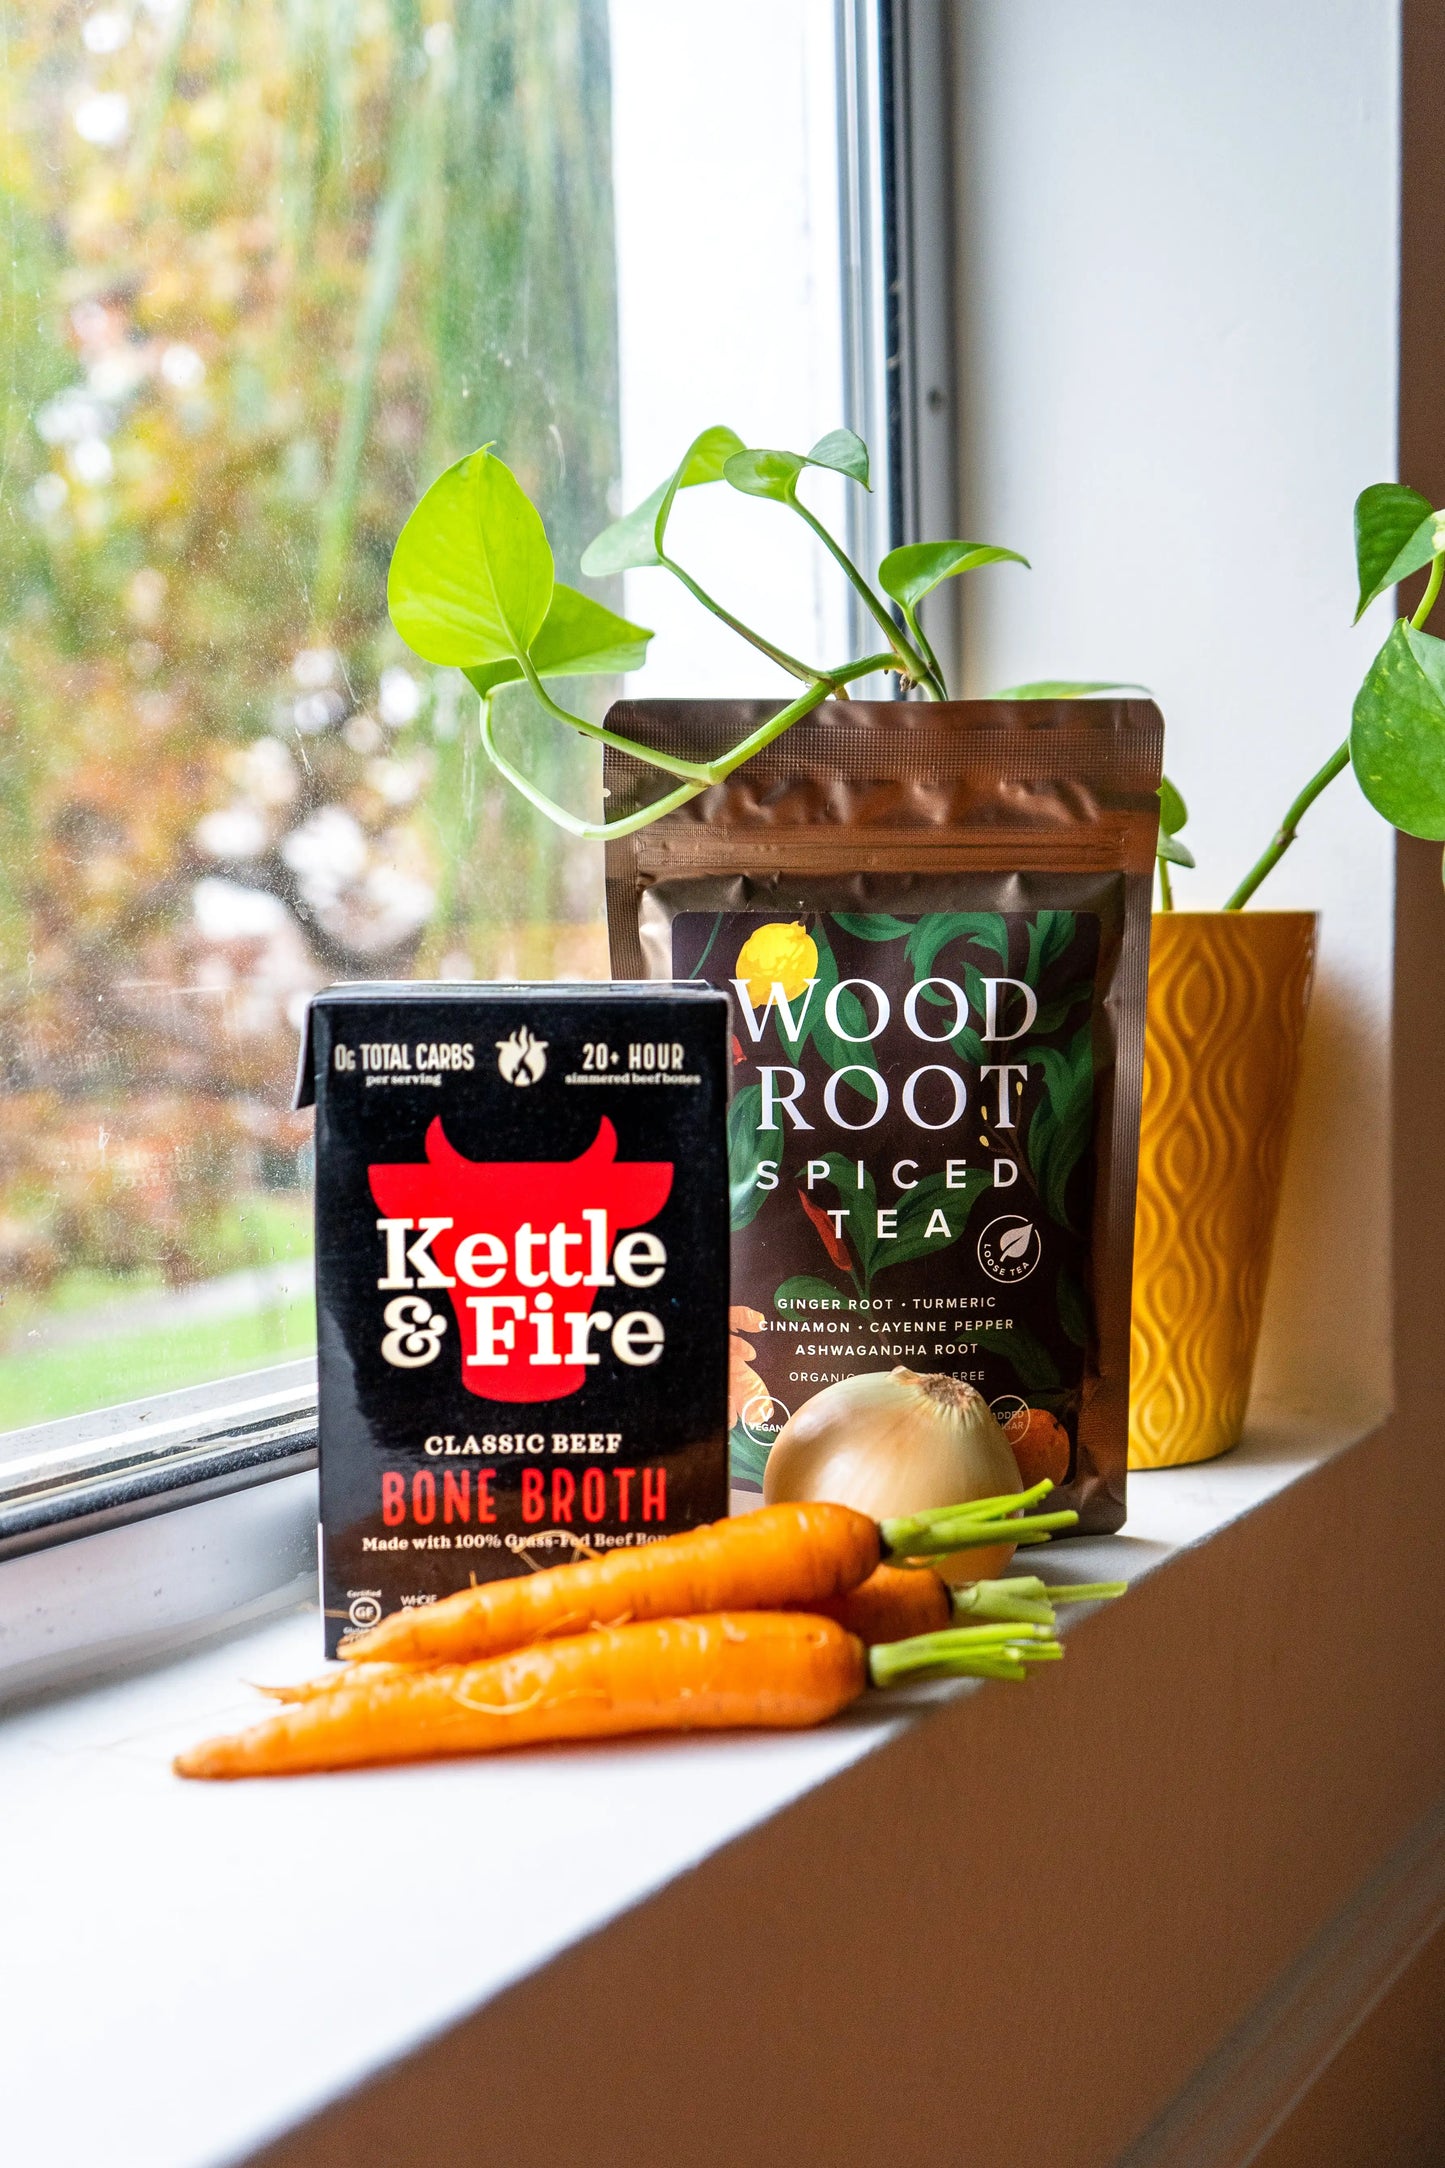 Woodroot Spiced Tea mixed with bone broth to create a hearty warm drink to promote health.